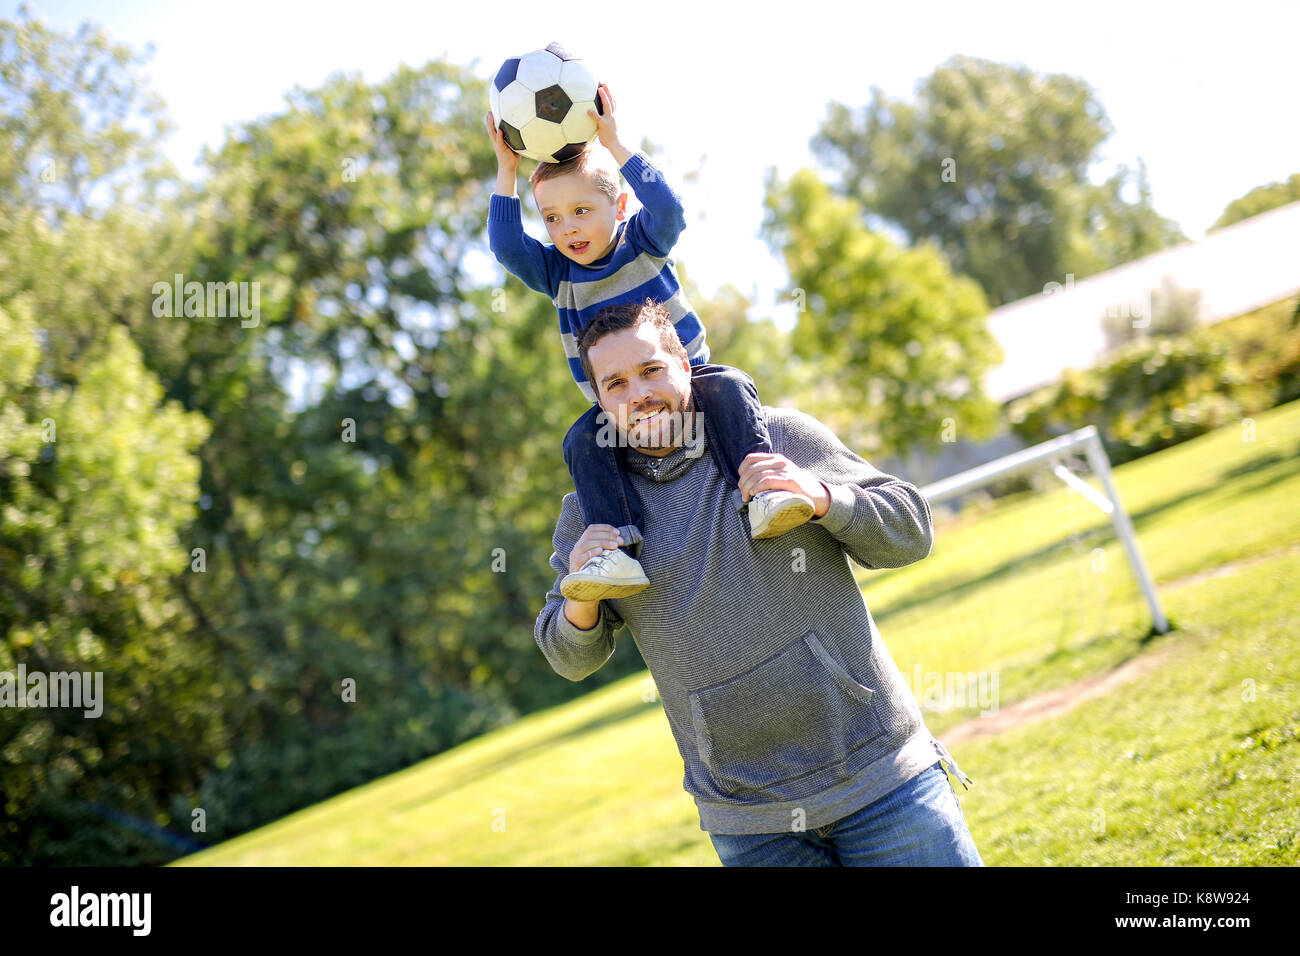 Father and Son Playing Ball in The Park Stock Photo